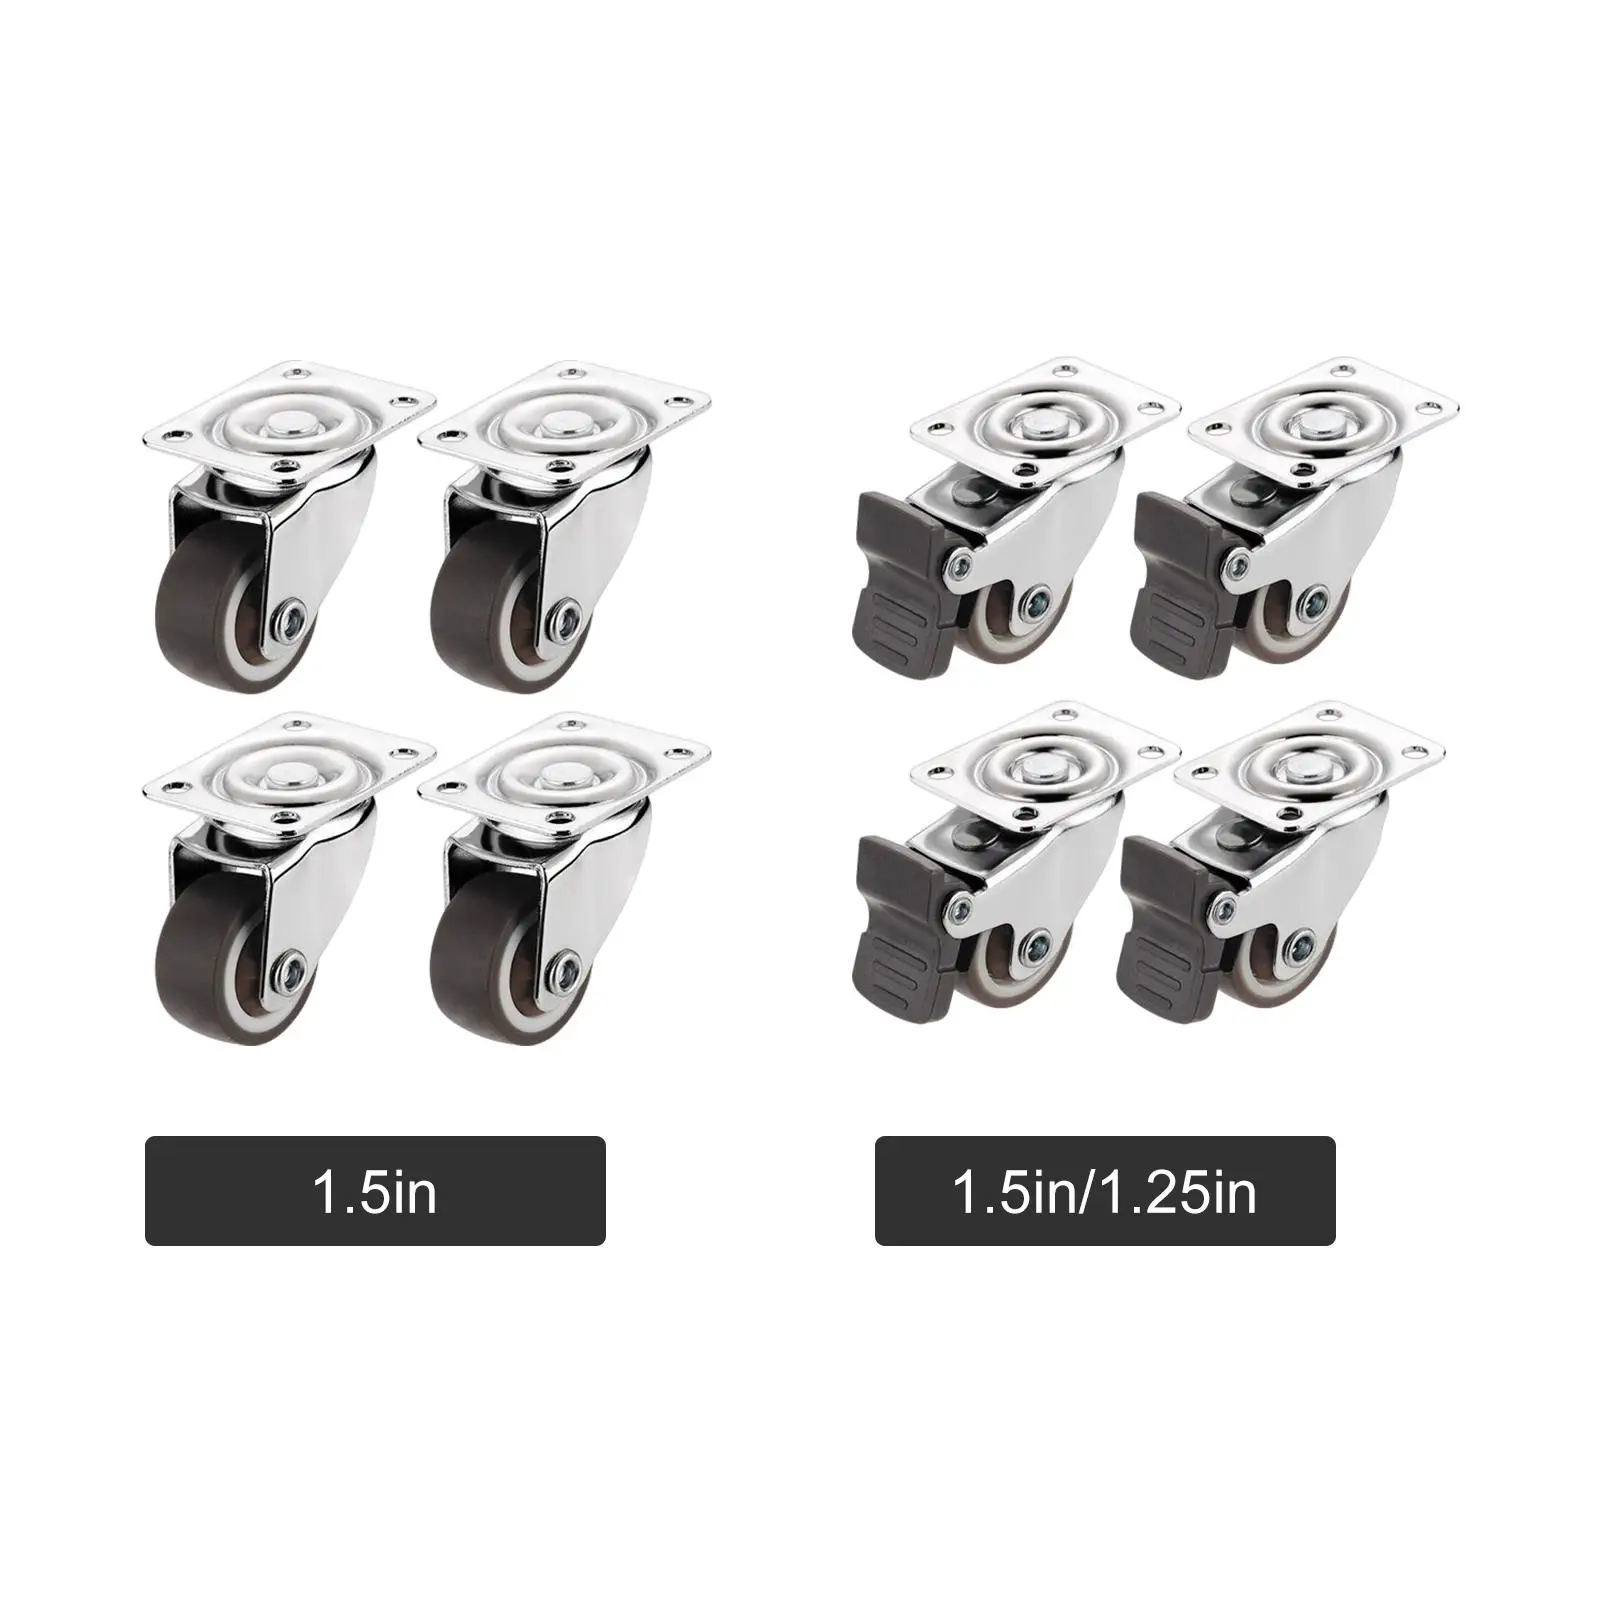 4Pcs Swivel Caster Trolley Furniture Caster Universal Wheel Roller Wheel for Chair Cabinet Table Workbench Cart